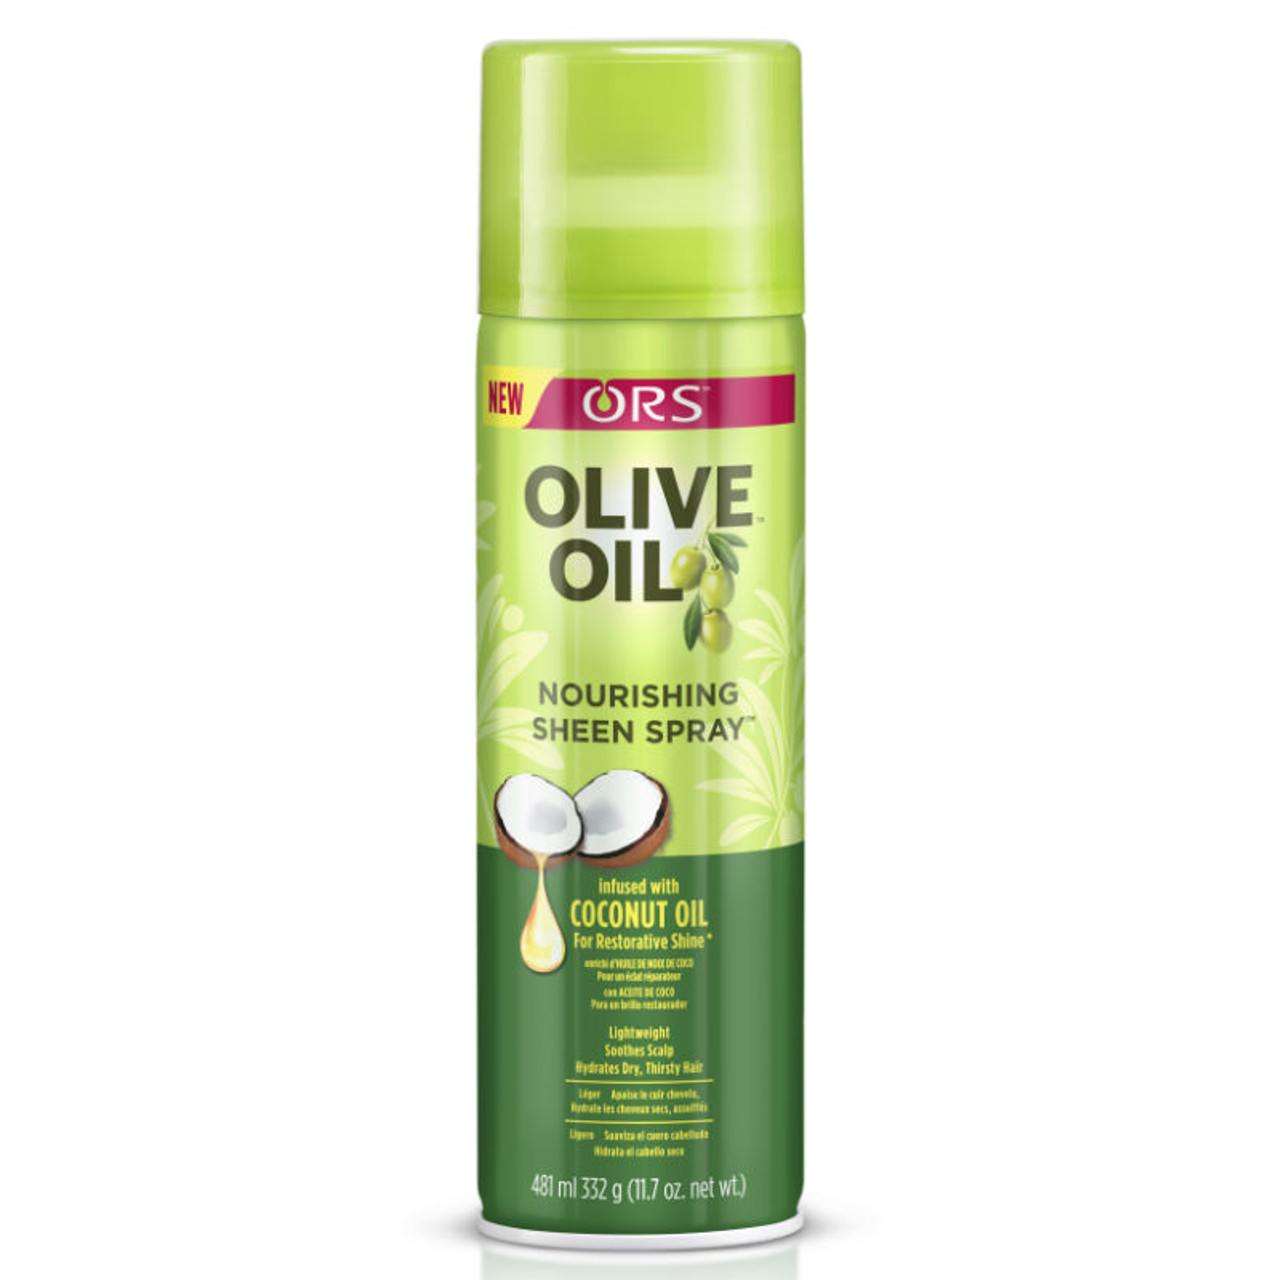 https://cdn11.bigcommerce.com/s-ah05h/images/stencil/1280x1280/products/11814/14224/ORS_Olive_Oil_Sheen_Spray_11oz__06241.1552766600.jpg?c=2